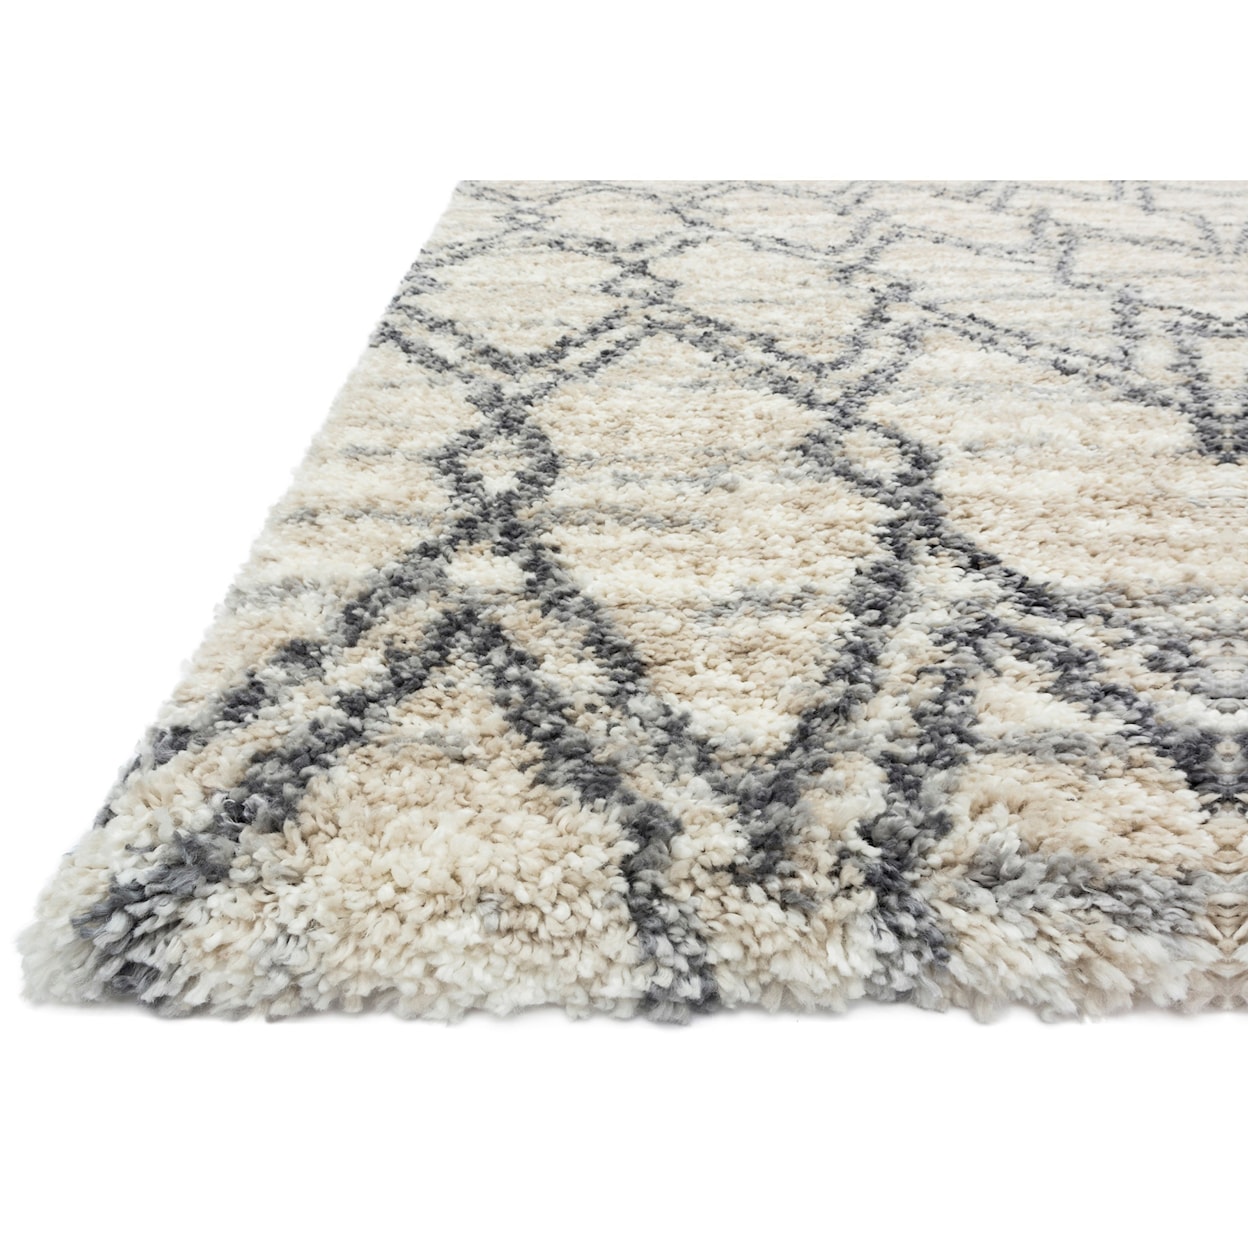 Reeds Rugs Quincy 3'3" x 6' Sand / Graphite Rug